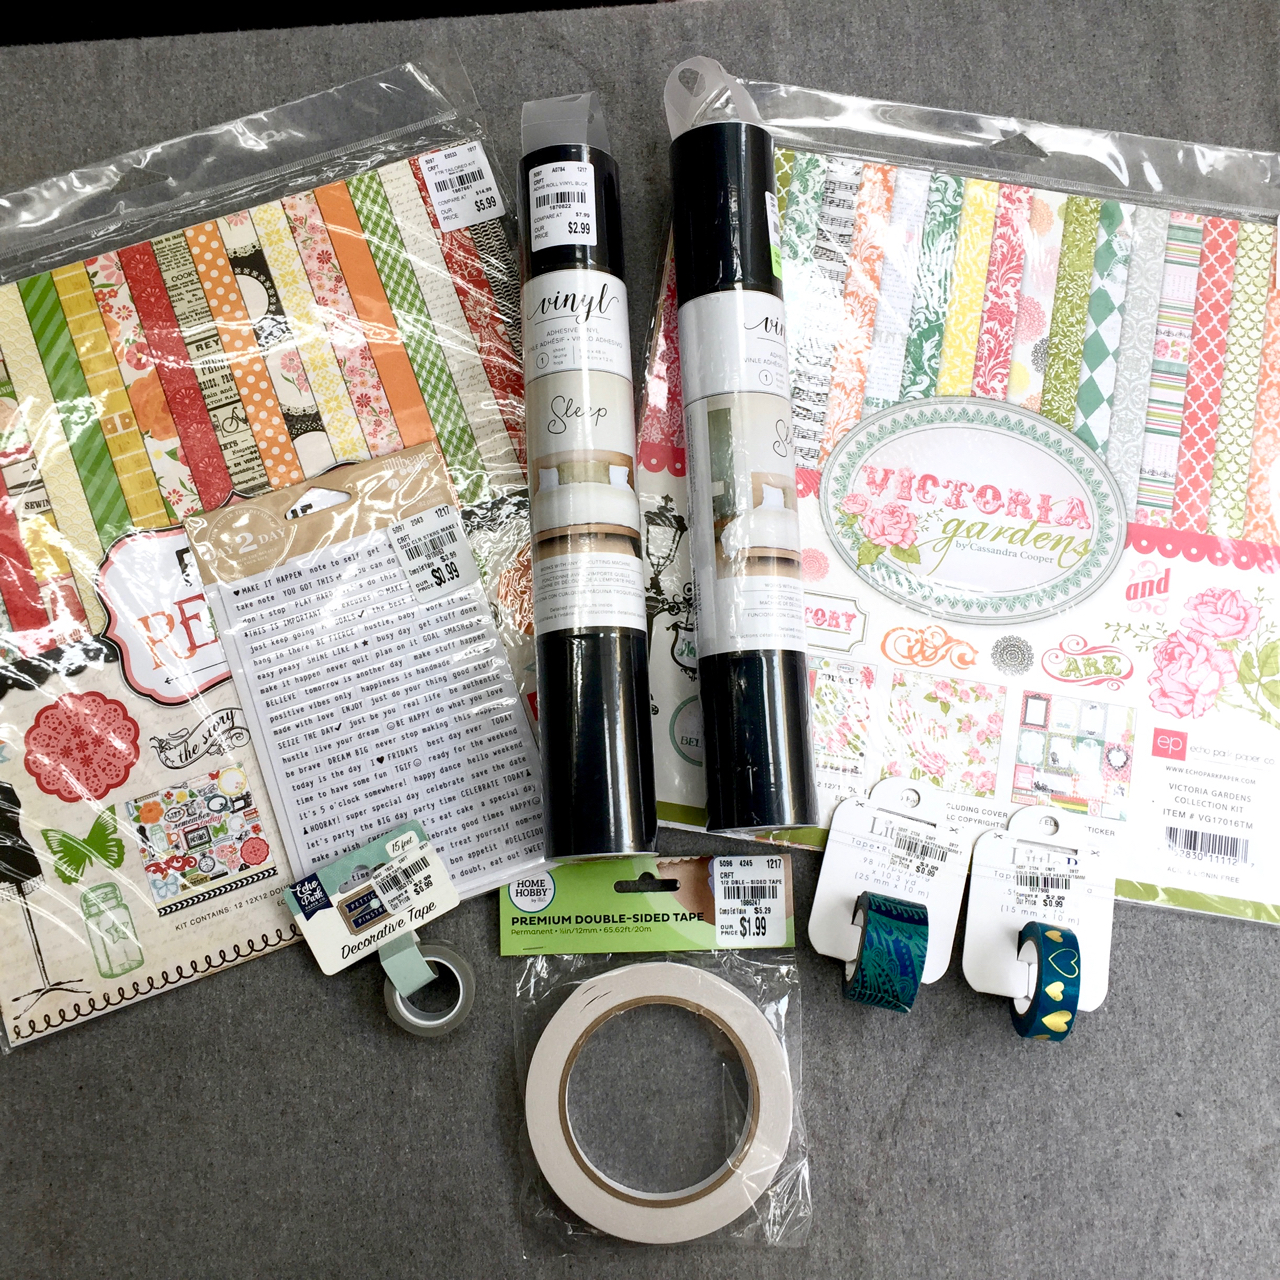 Unboxing Encaustic Art Supplies Haul - To Create my Own Starter